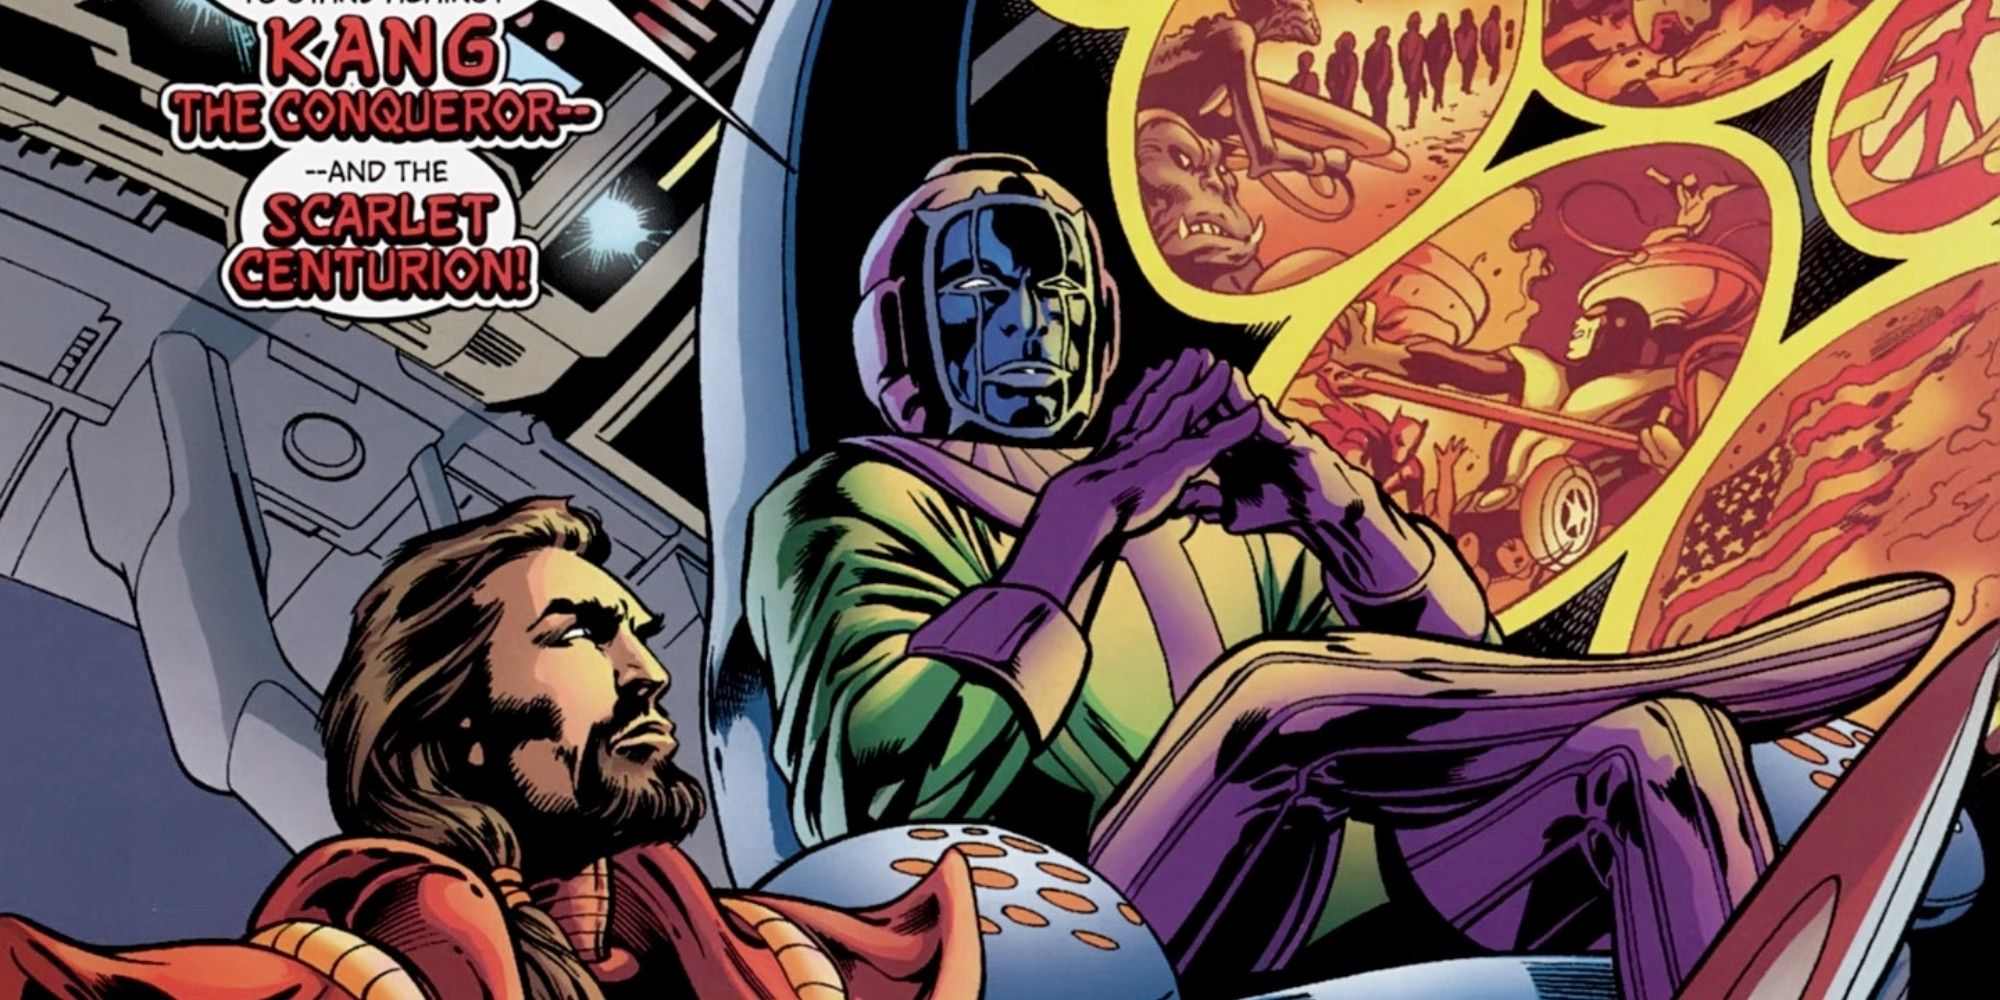 Kang_and_the_Scarlet_Centurion_during_Avengers_Vol_3_40